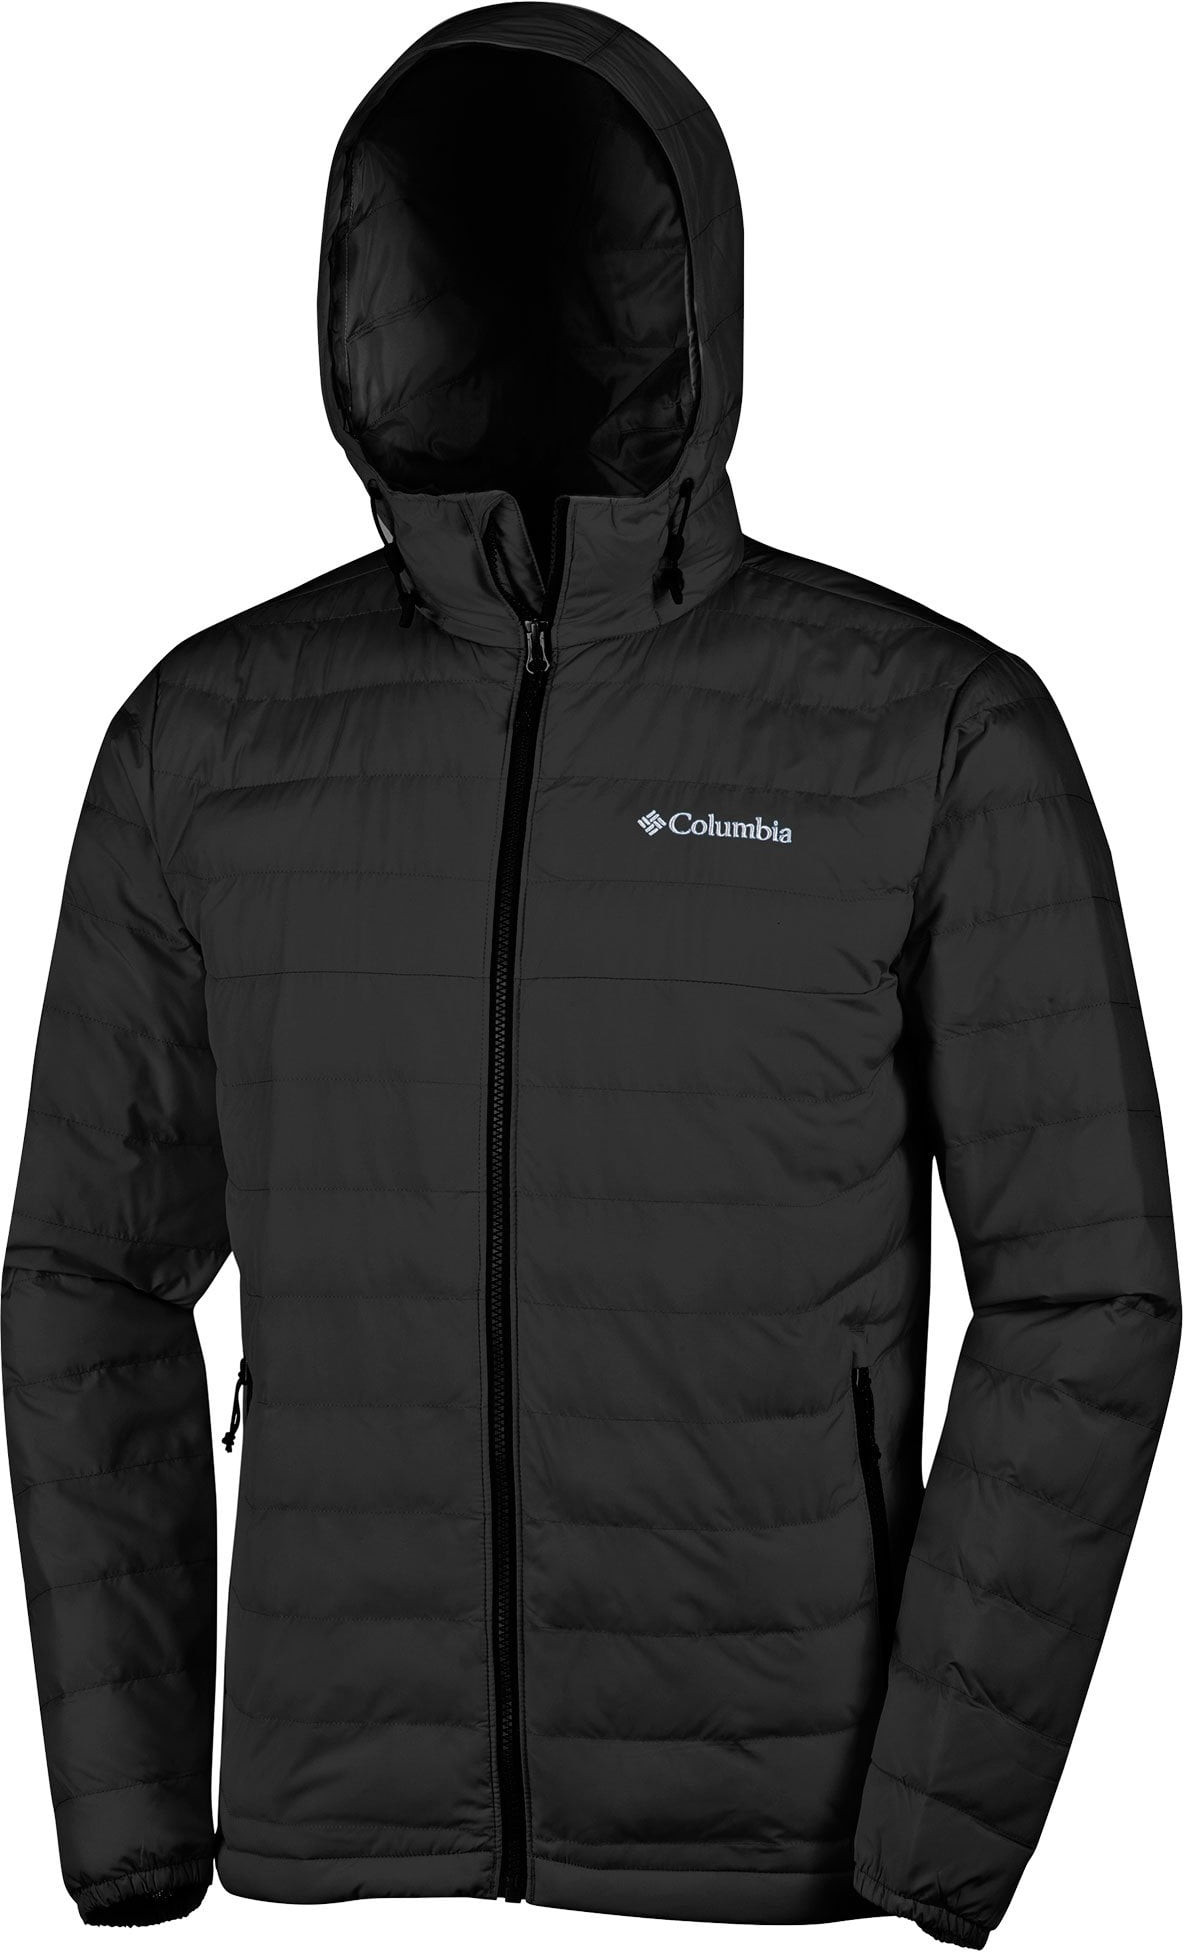 Unlock Wilderness' choice in the Mountain Hardwear Vs Columbia comparison, the Powder Lite™ Hooded Insulated Jacket by Columbia